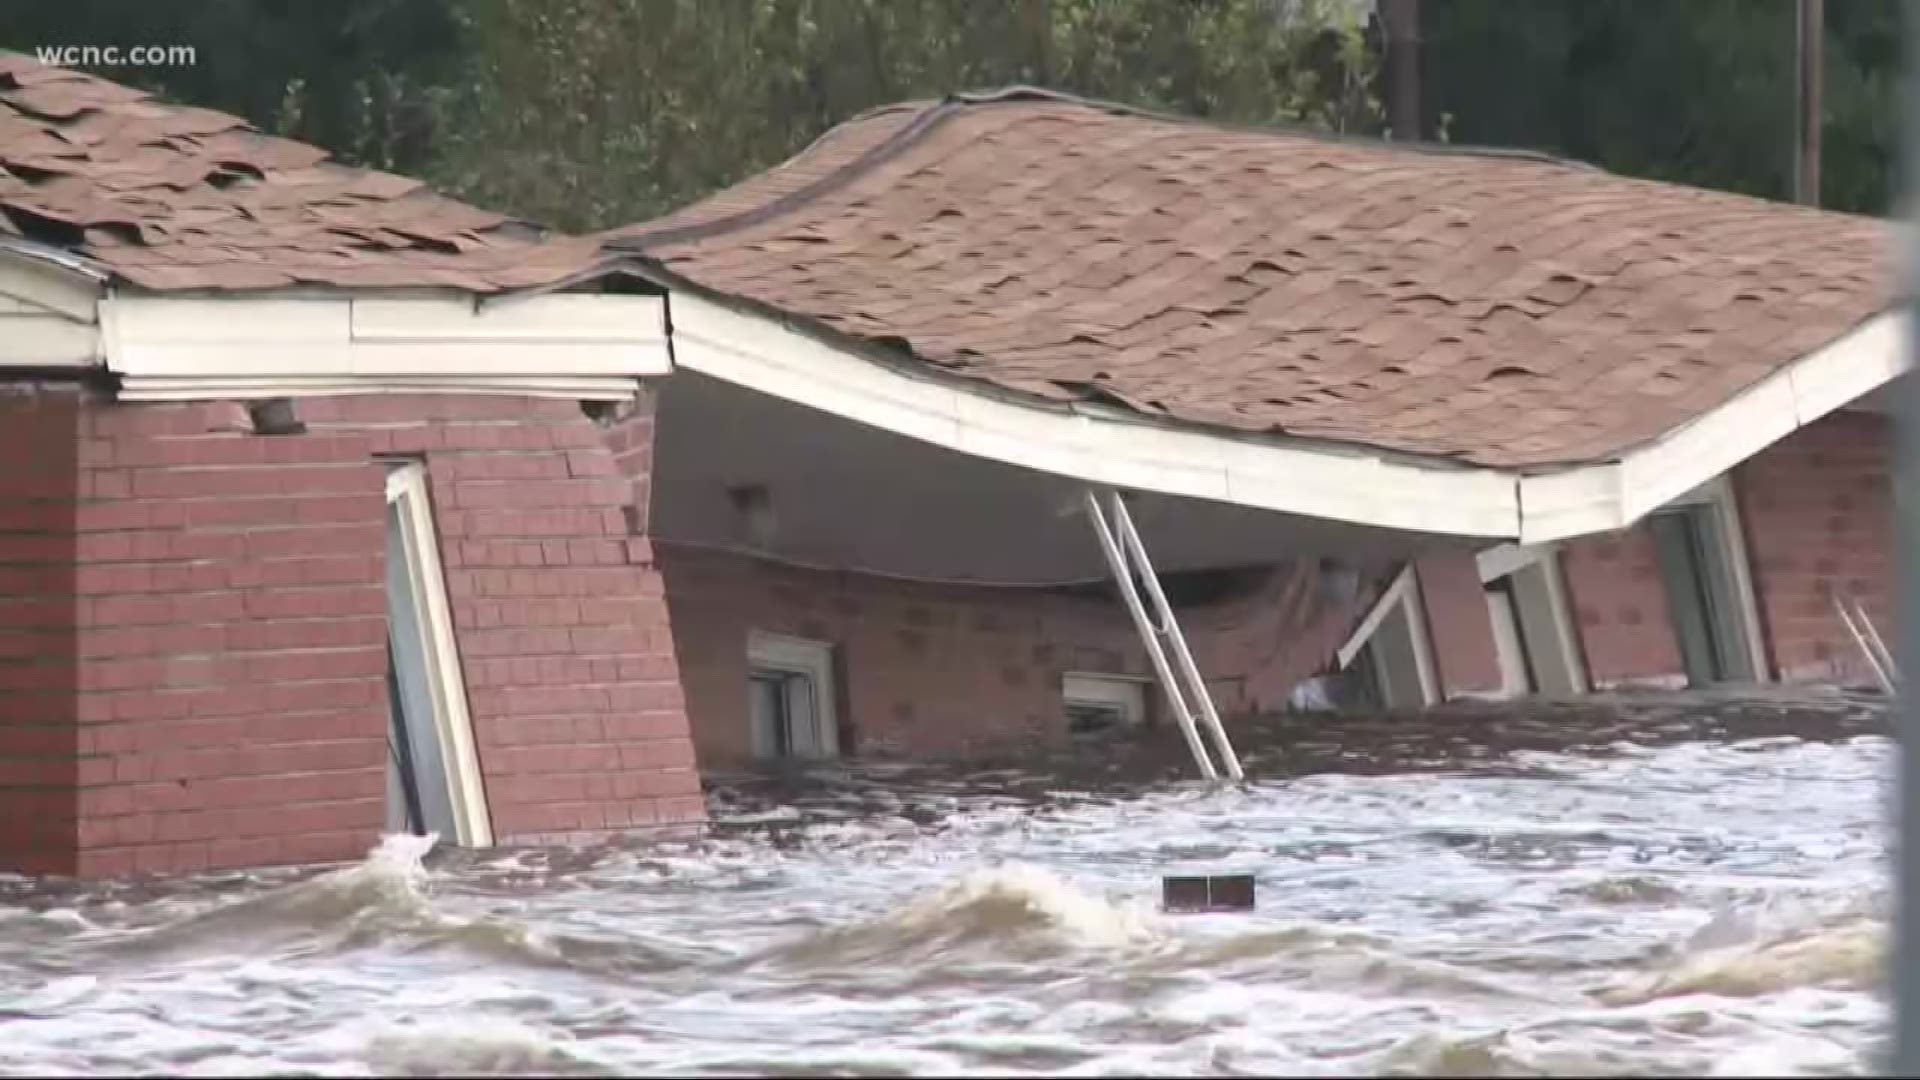 Jacksonville homes, churches, motels, cemeteries all flooded and damaged by Florence.